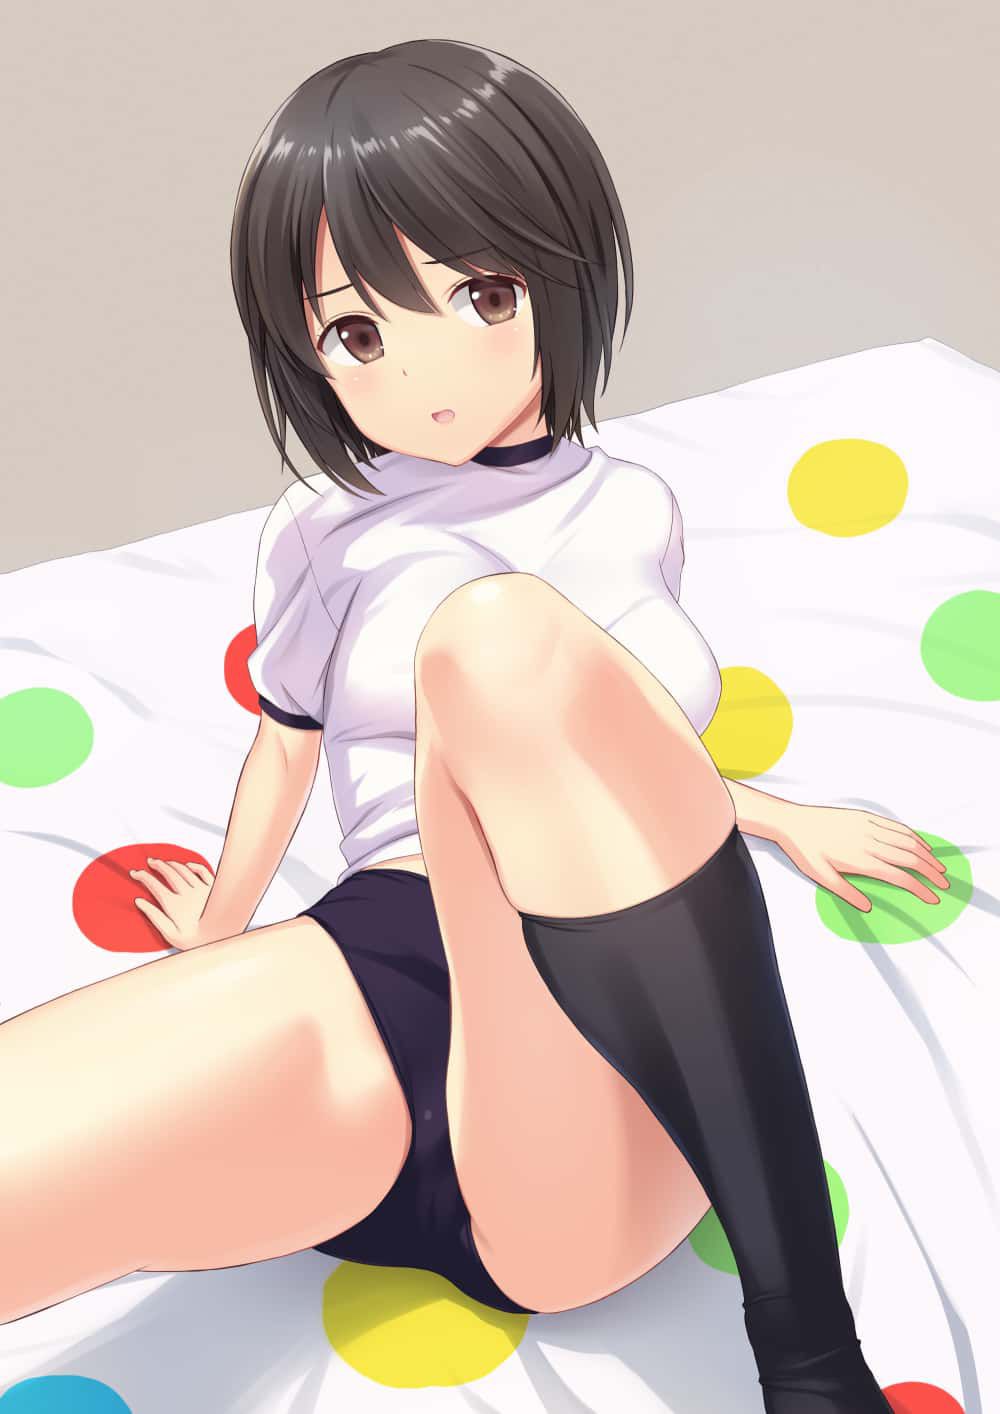 Twister Game Erotic Images: [Secondary] 2